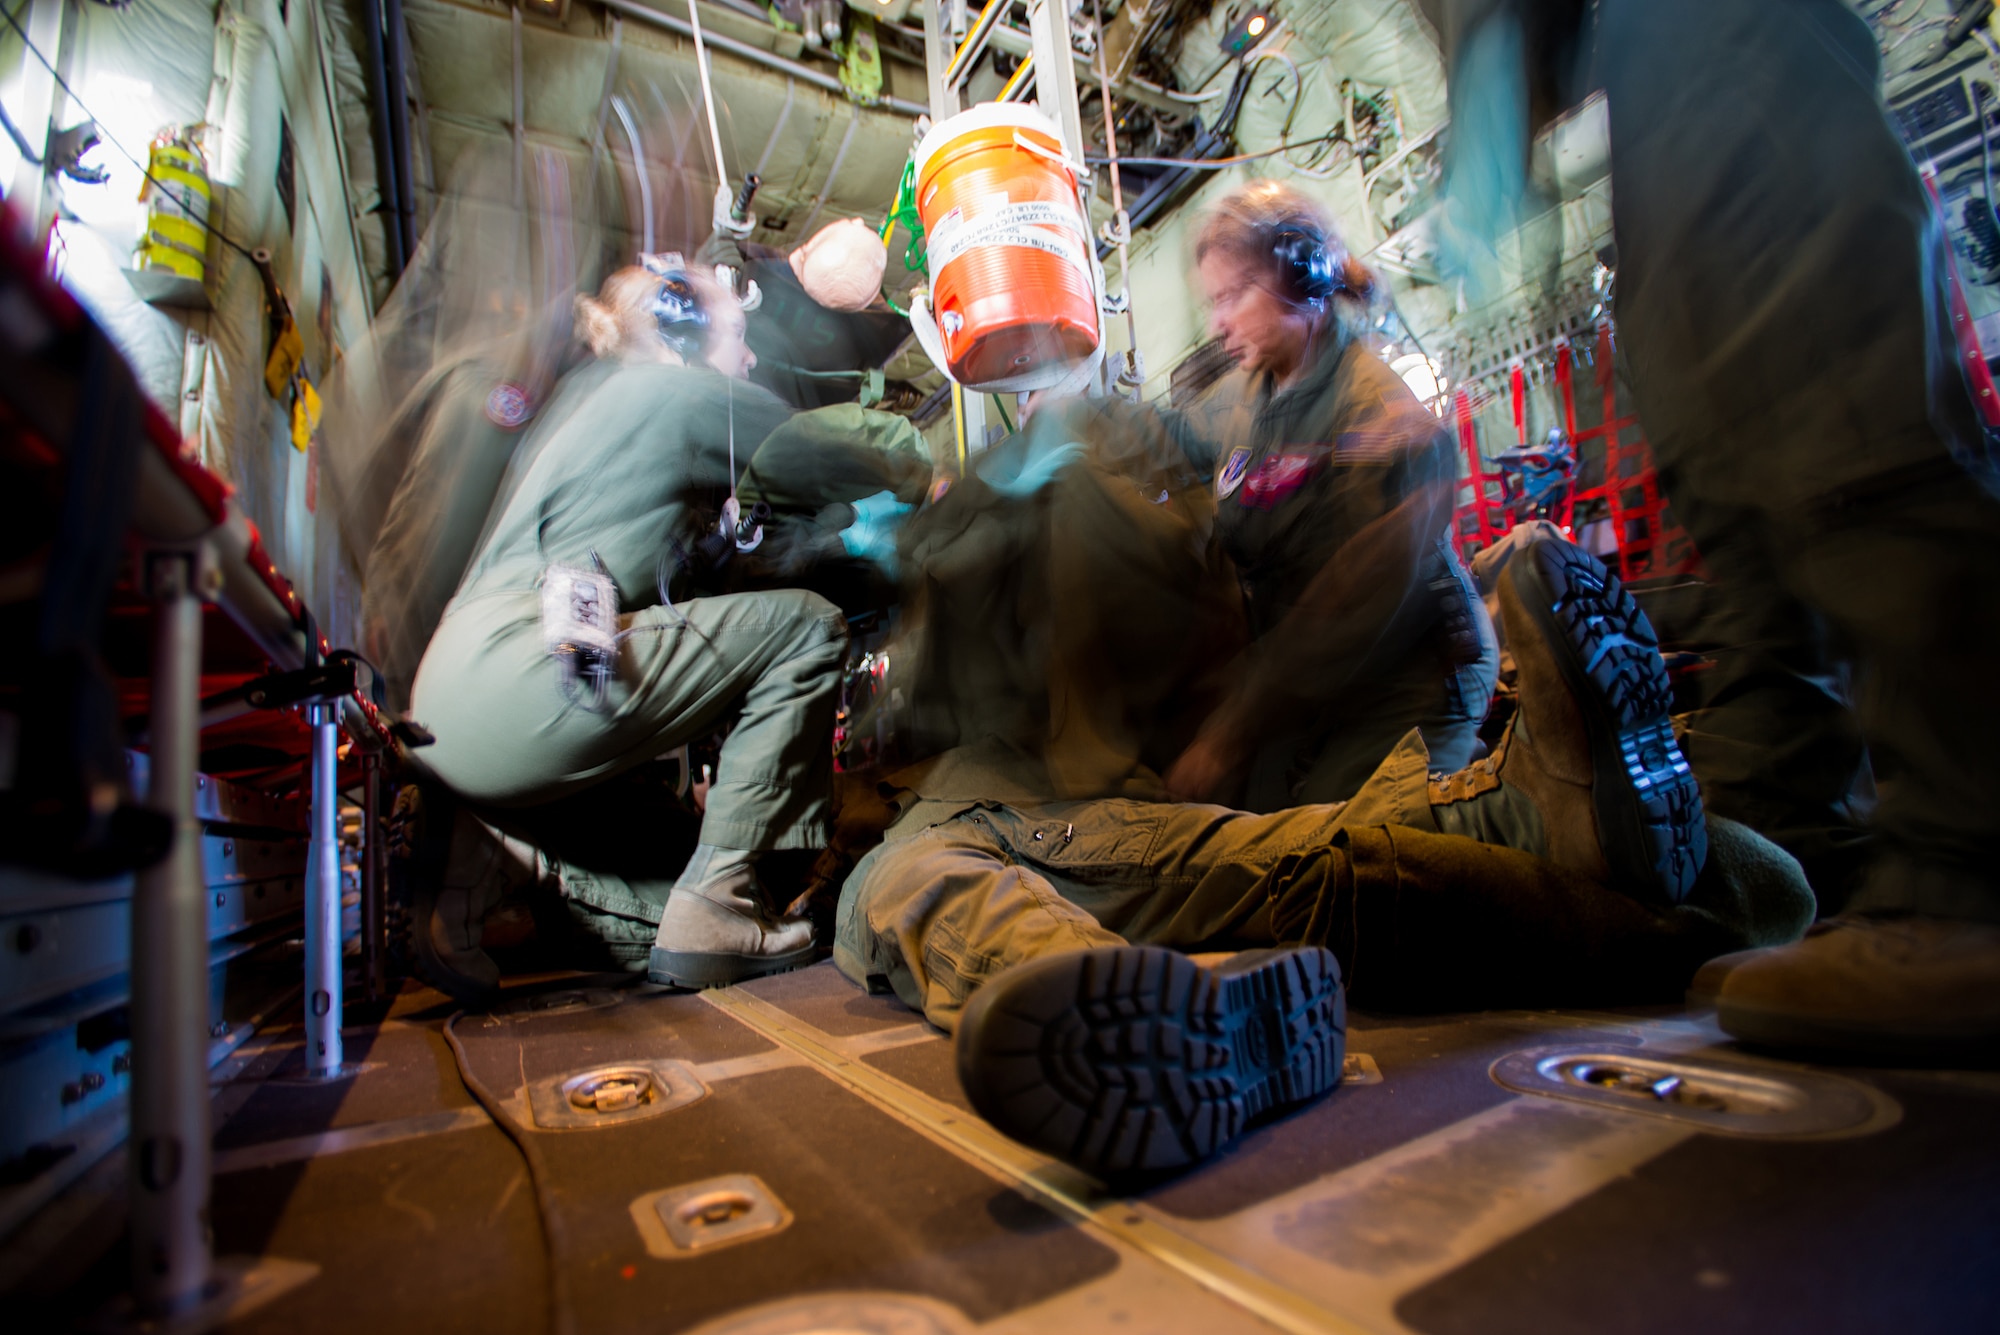 Airmen of the 137th Aeromedical Evacuation Squadron, Oklahoma Air National Guard, treat a simulated injured patient while on a C-130 Hercules flown by the 130th Airlift Wing, West Virginia ANG, as part of a joint ANG training mission, Sep. 12, 2015. The training helped 137 AES Airmen experience different airframes and new flight crews while maintaining flight readiness.(U.S. Air National Guard photo by Senior Airman Tyler Woodward/Released) 